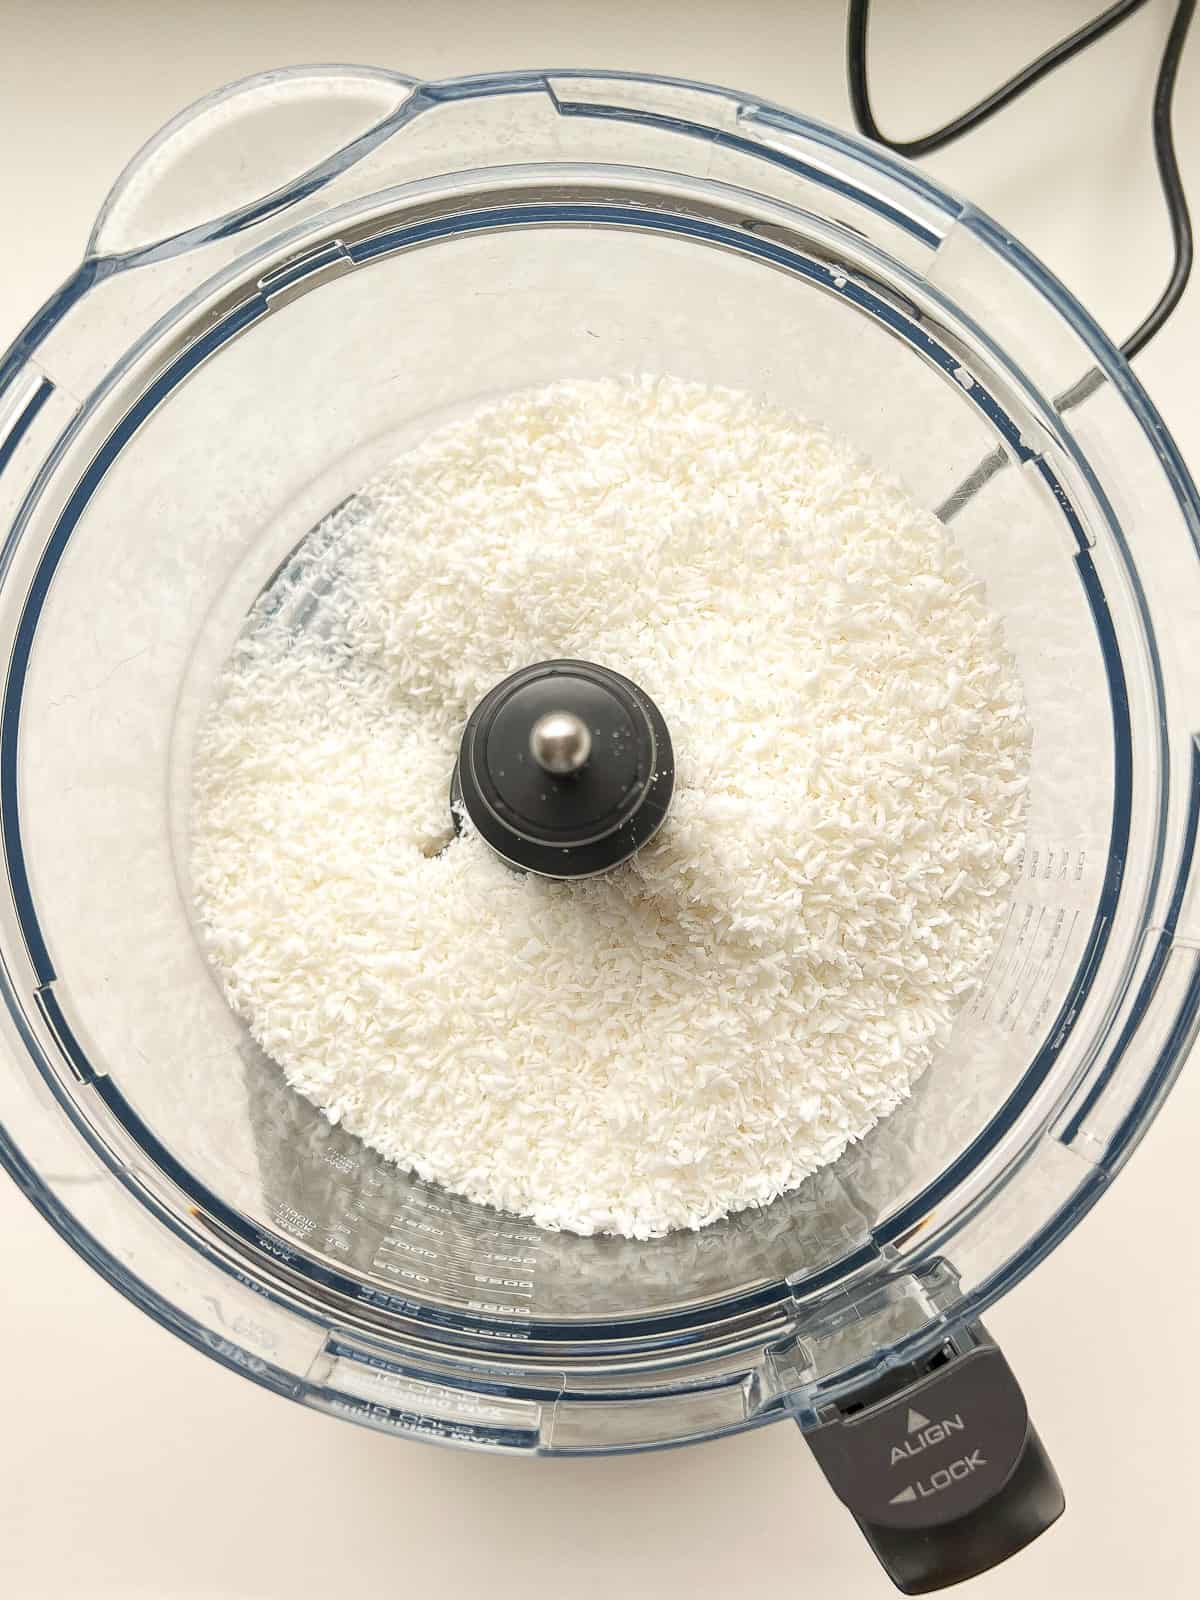 An image of shredded coconut inside the canister of a food processor.